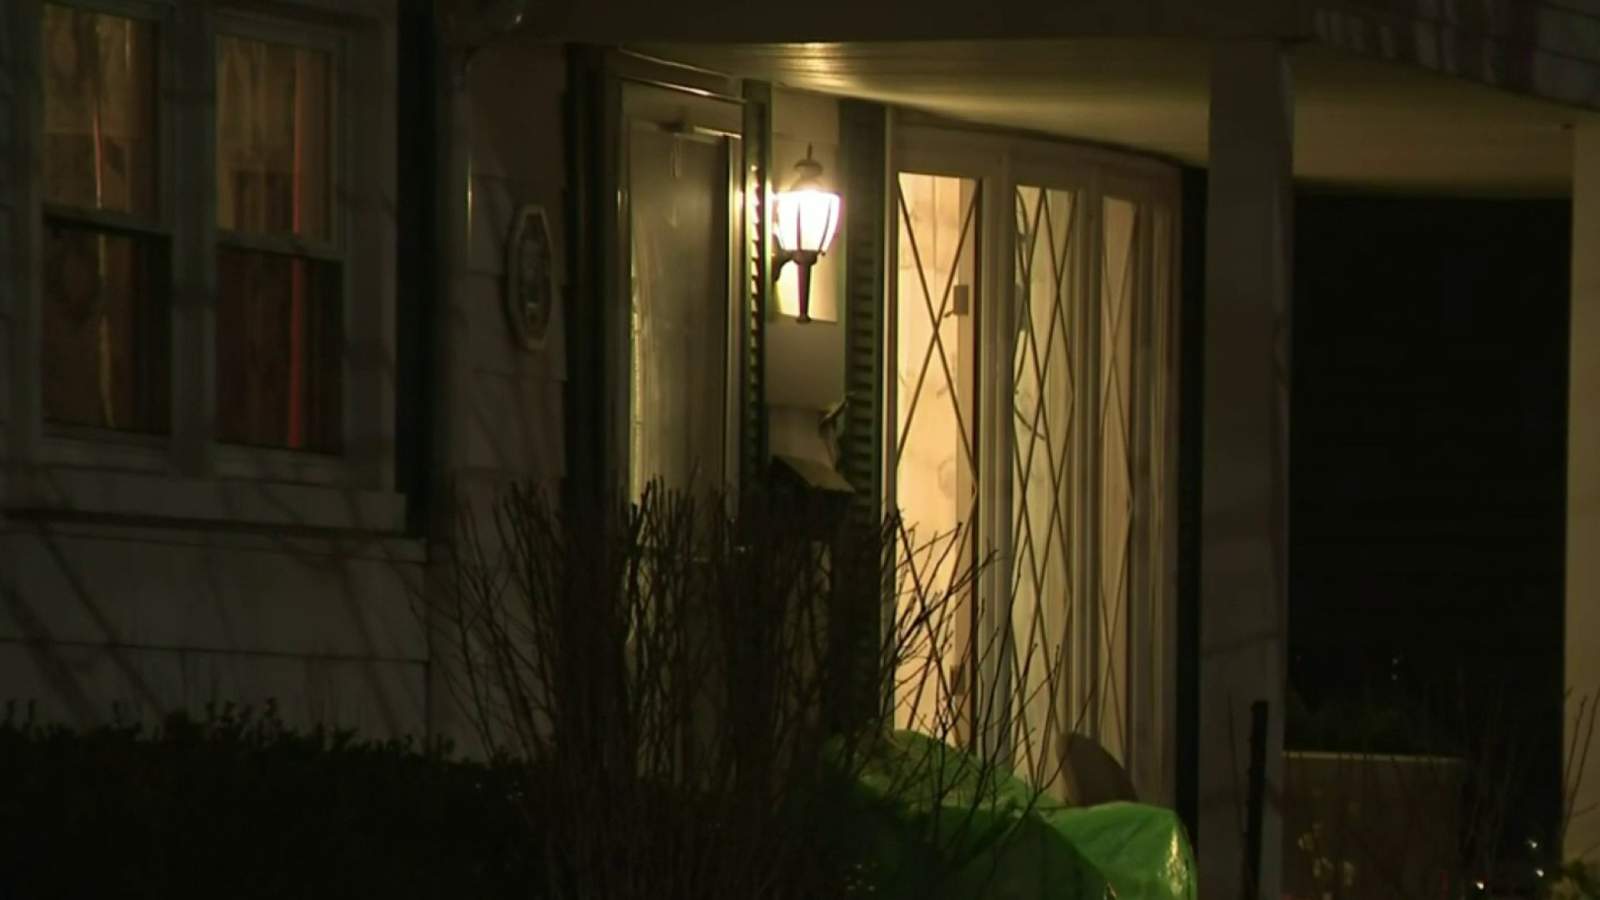 Police find 2 dead, 1 injured at Garden City home after apparent murder-suicide 911 call